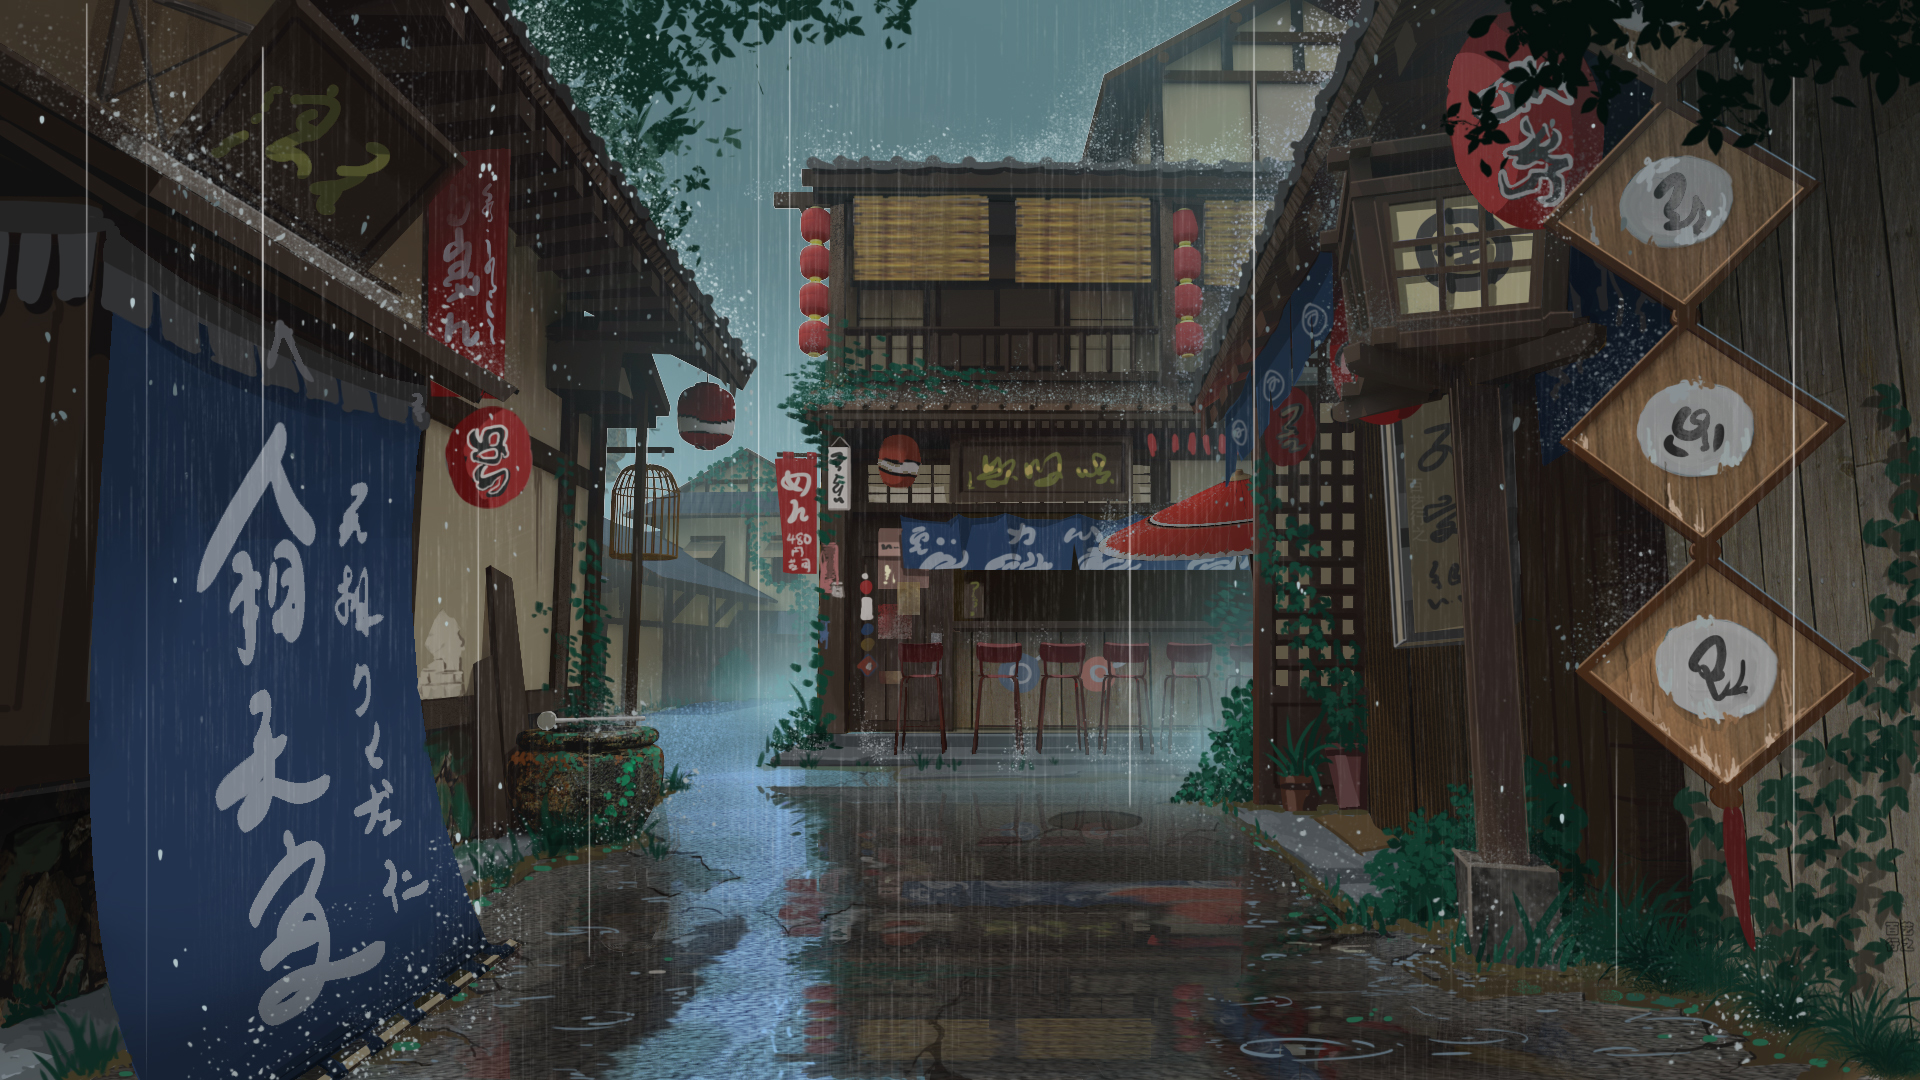 Free download Rainy night Ah My Goddess Anime Background Wallpapers  450x277 for your Desktop Mobile  Tablet  Explore 41 Anime Rain  Wallpapers  Rain Wallpaper Rain Wallpapers Rain Drop Wallpaper